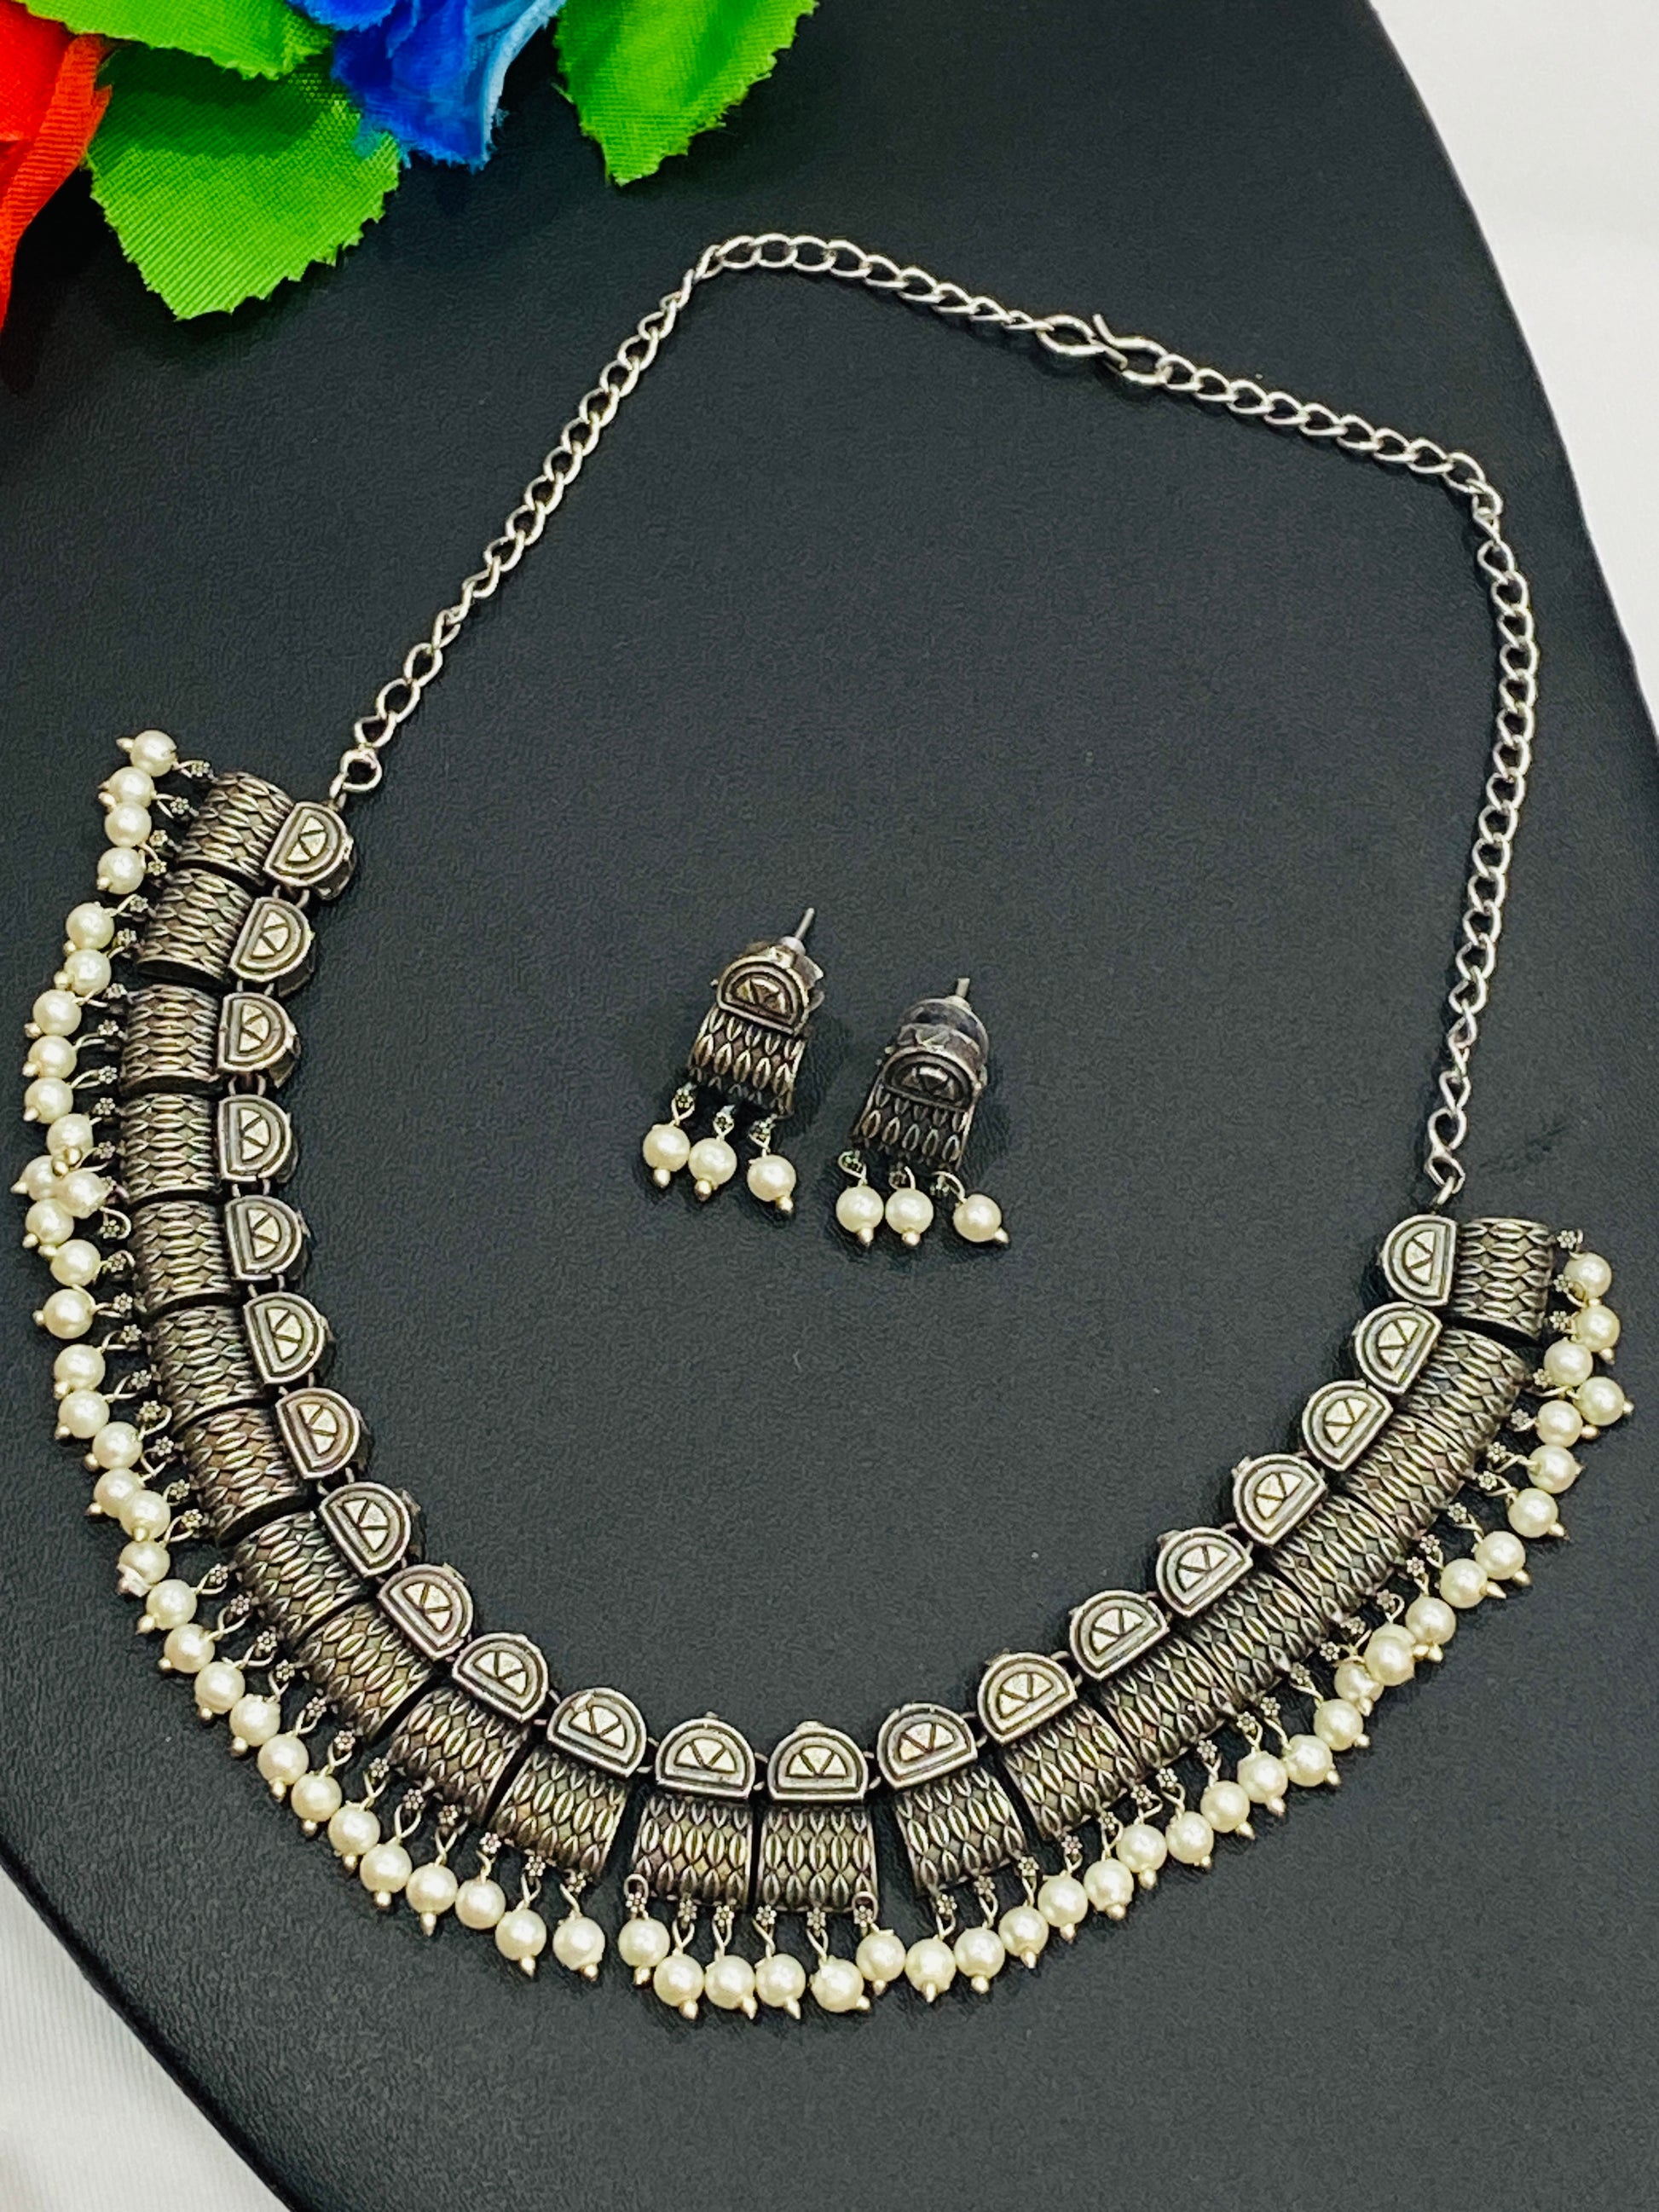 Unique Tribal Style Handmade Ethnic Silver Plated Oxidized Necklace Set With Earrings And Pearl Beads